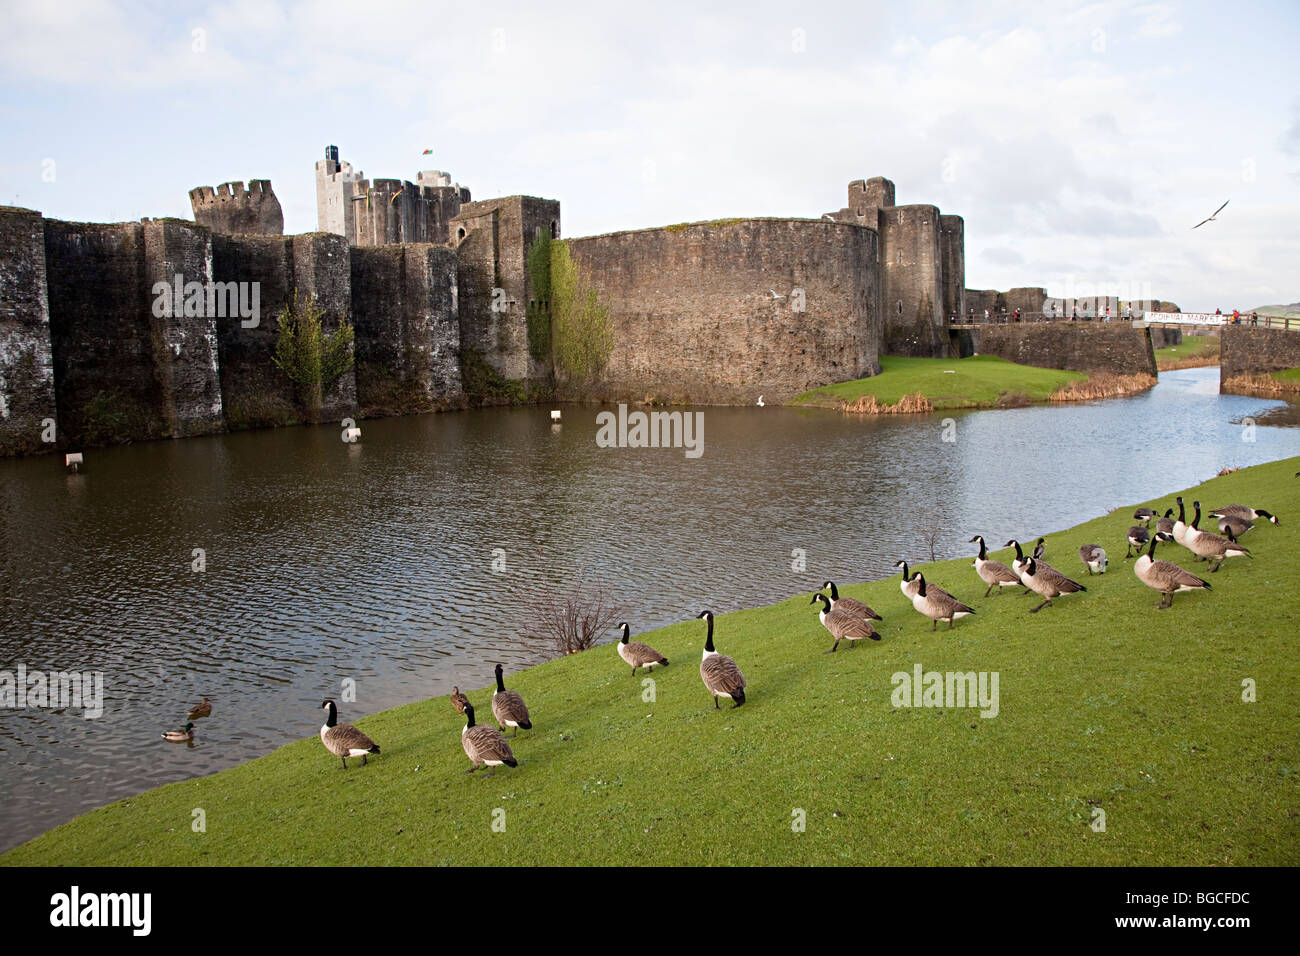 Canada geese Branta canadensis at Caerphilly castle Wales UK Stock Photo